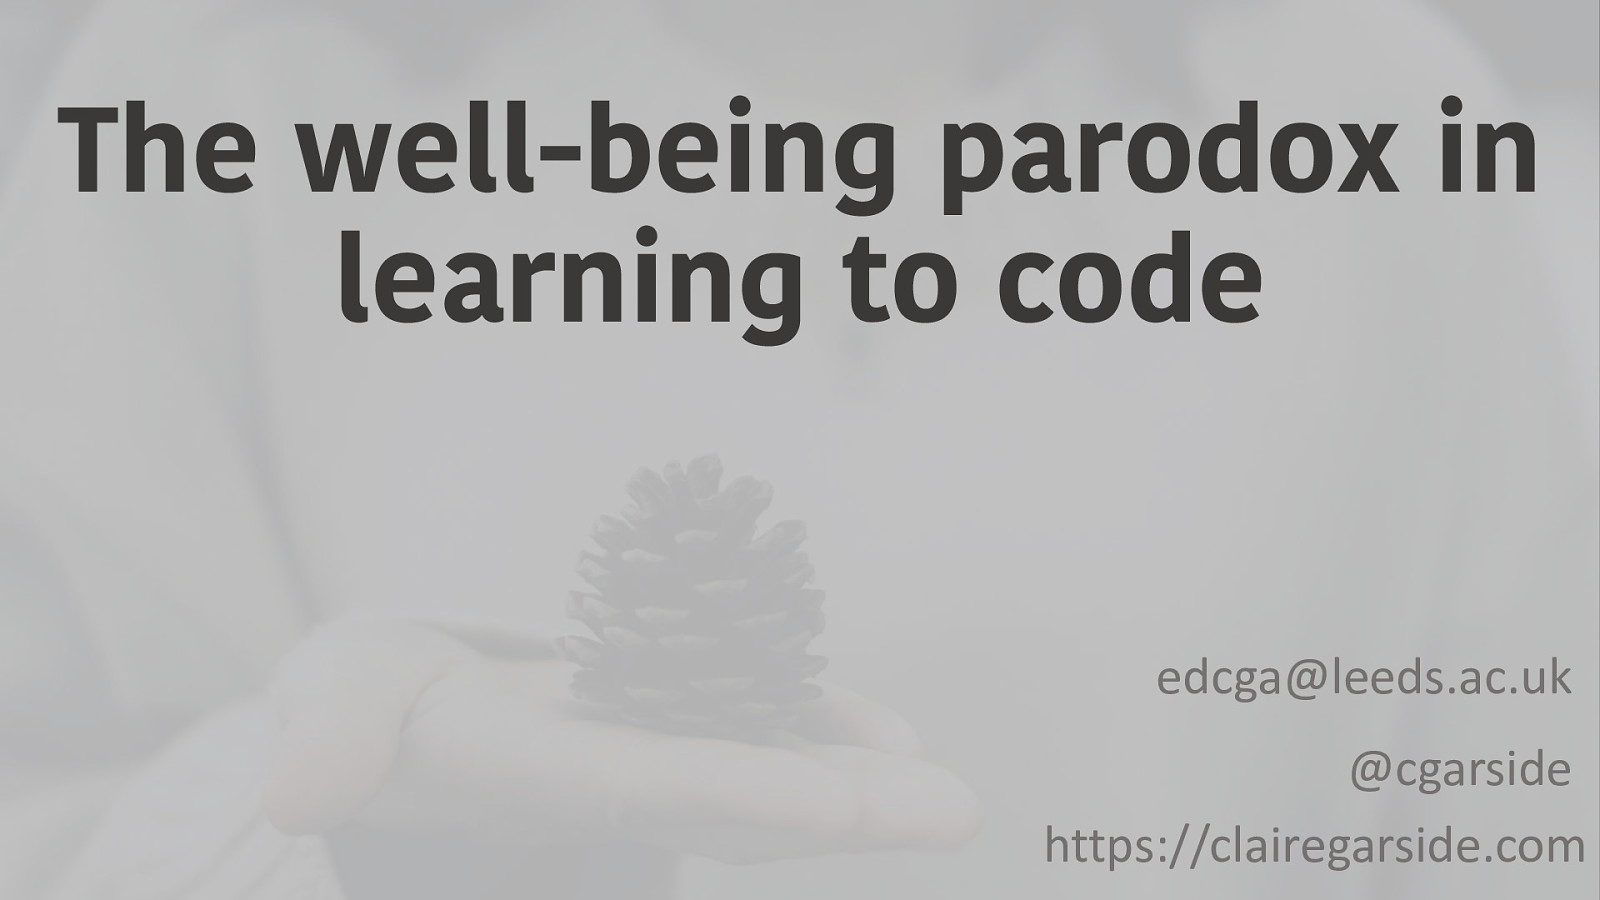 The well-being paradox in learning to code